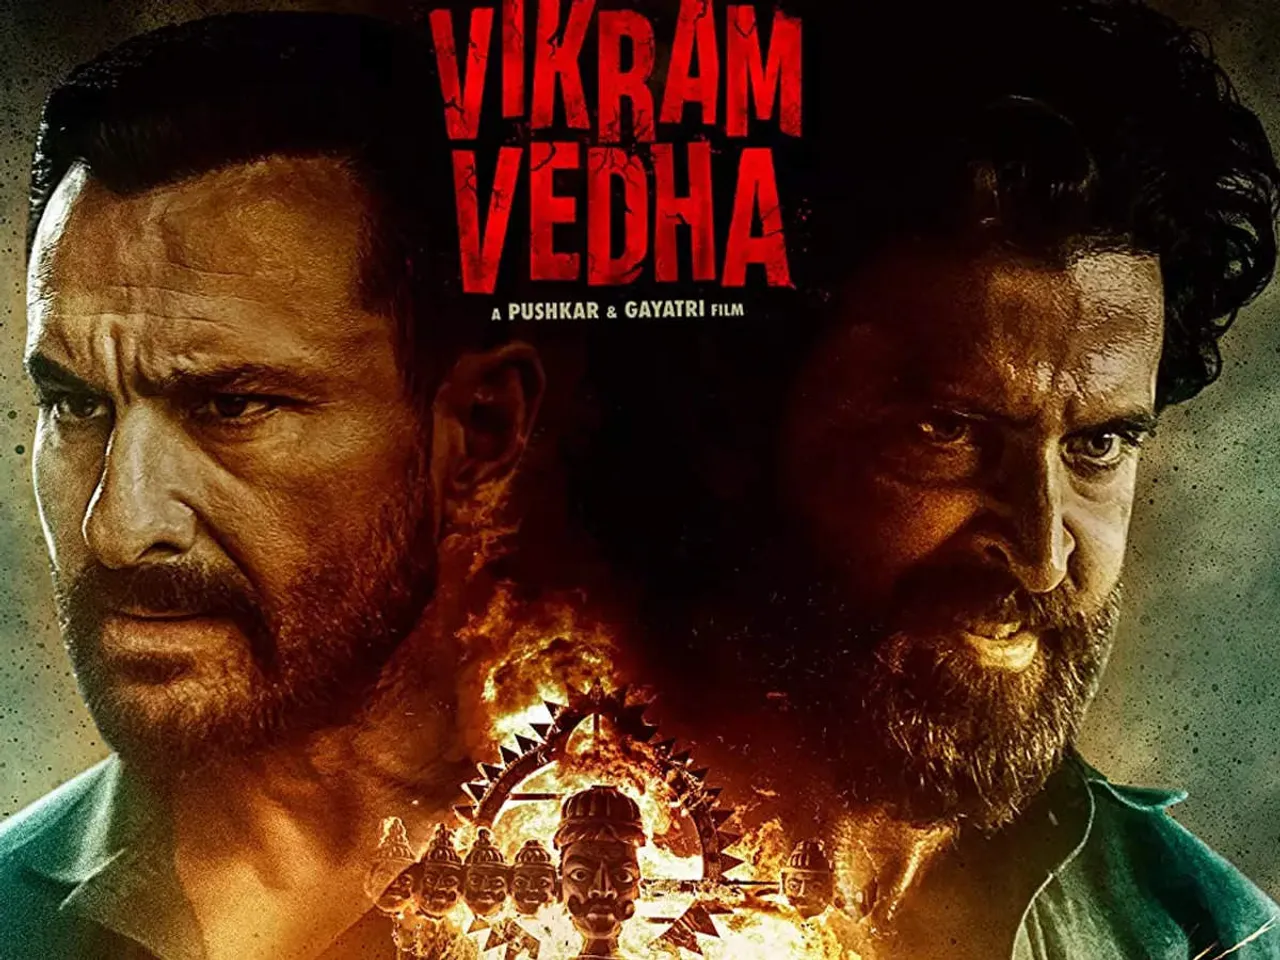 Vikram Vedha Twitter Review : Netizens Compares Film With Original, Disappointed With Performances